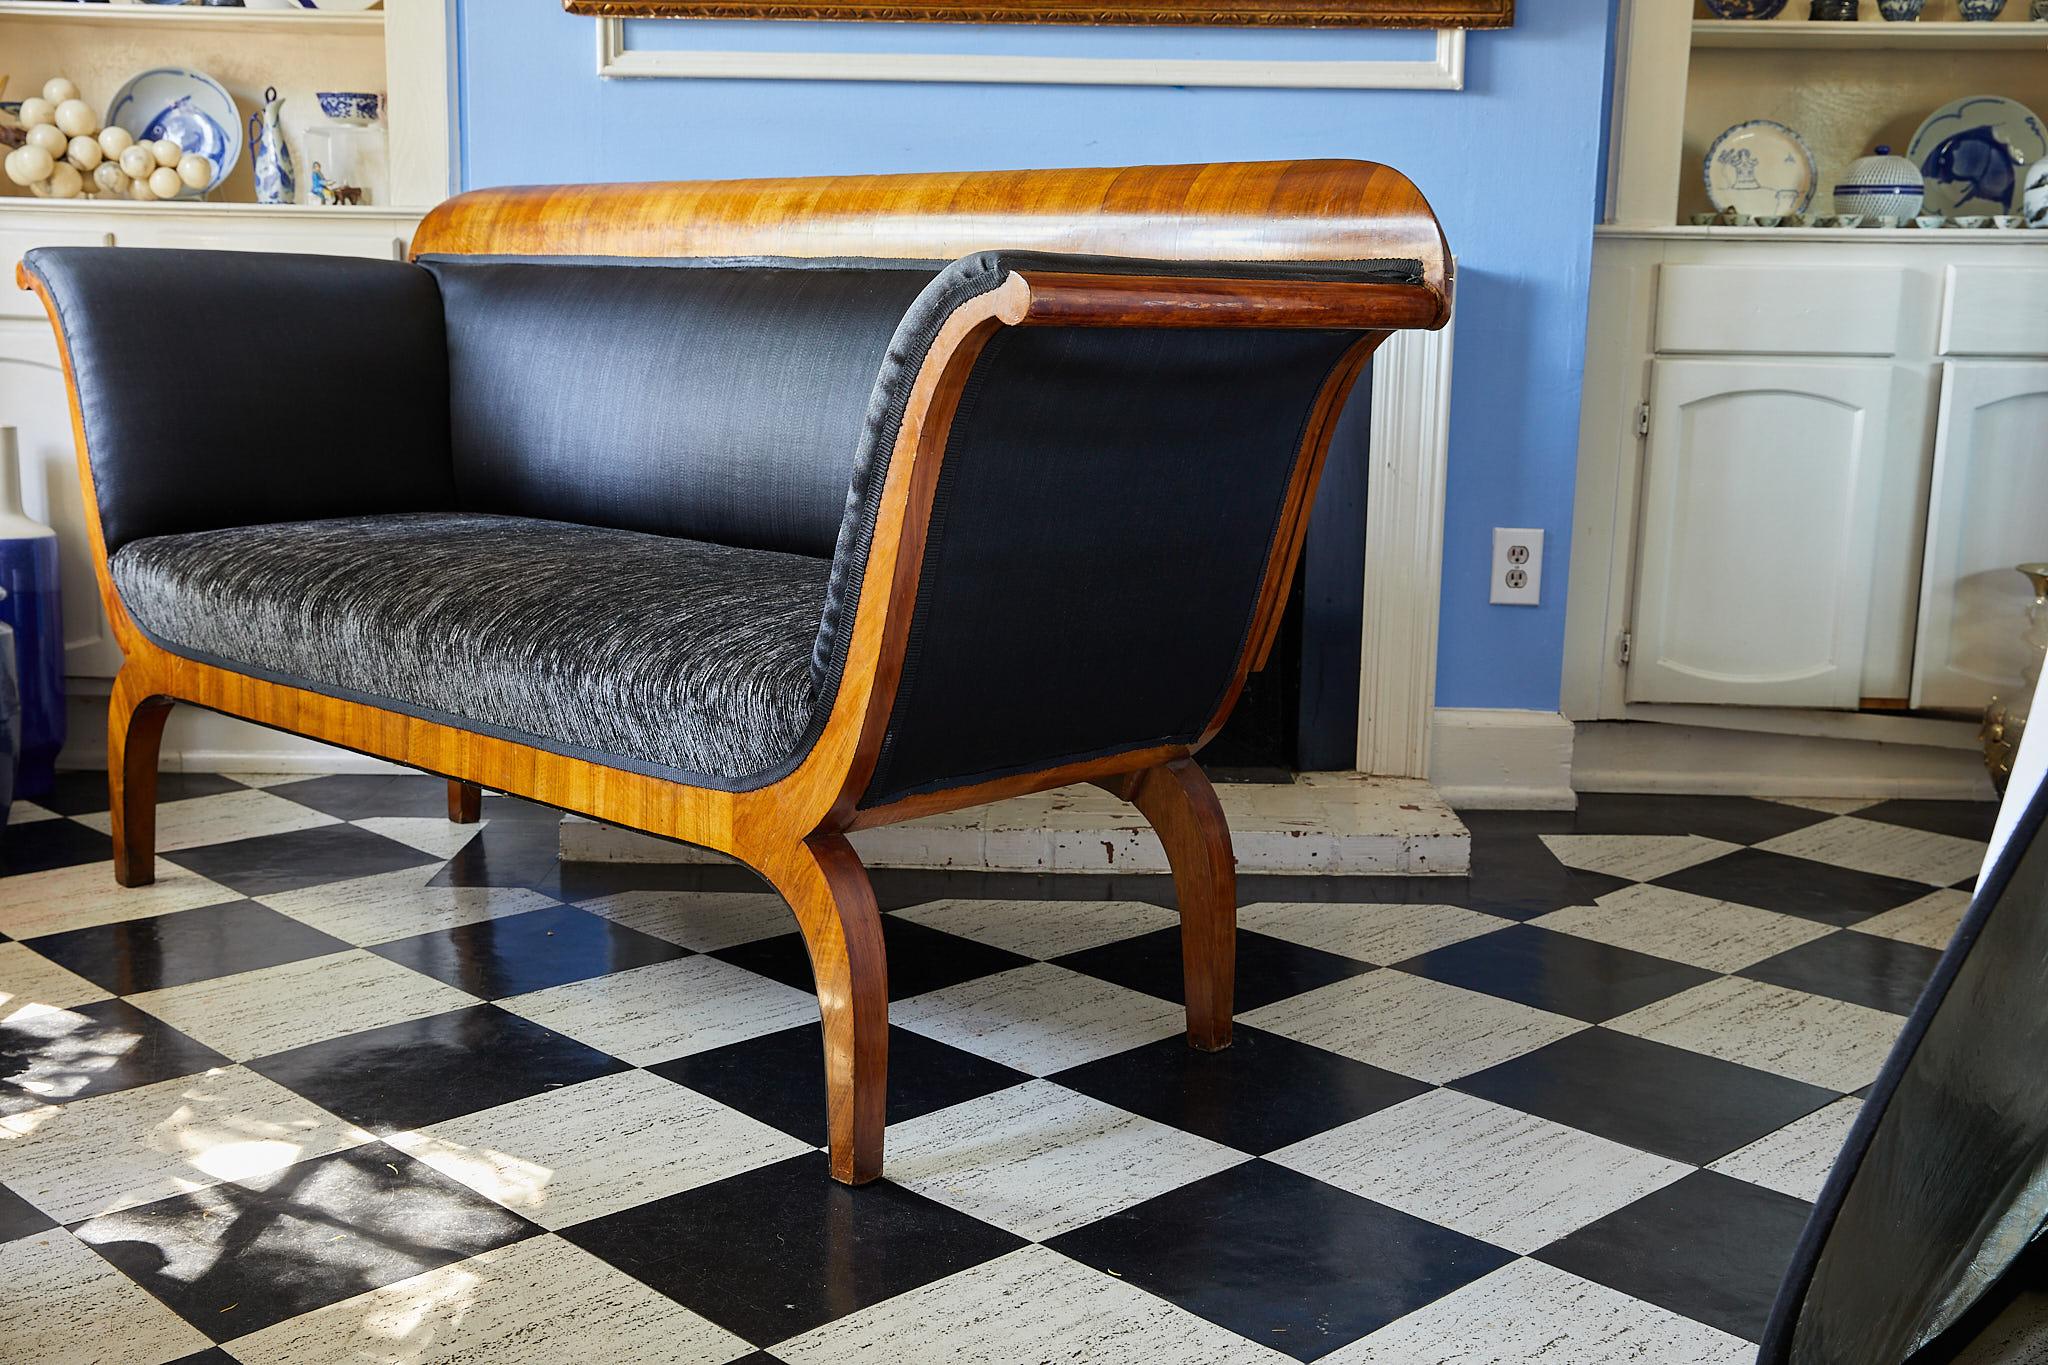 Early 19th century Biedermeier period sofa of elegant proportions. The sofa's crest rail, upswept arms, apron, and curved legs are veneered in Cherrywood. The arms and tight back of the sofa are upholstered in sleek black horsehair fabric while the